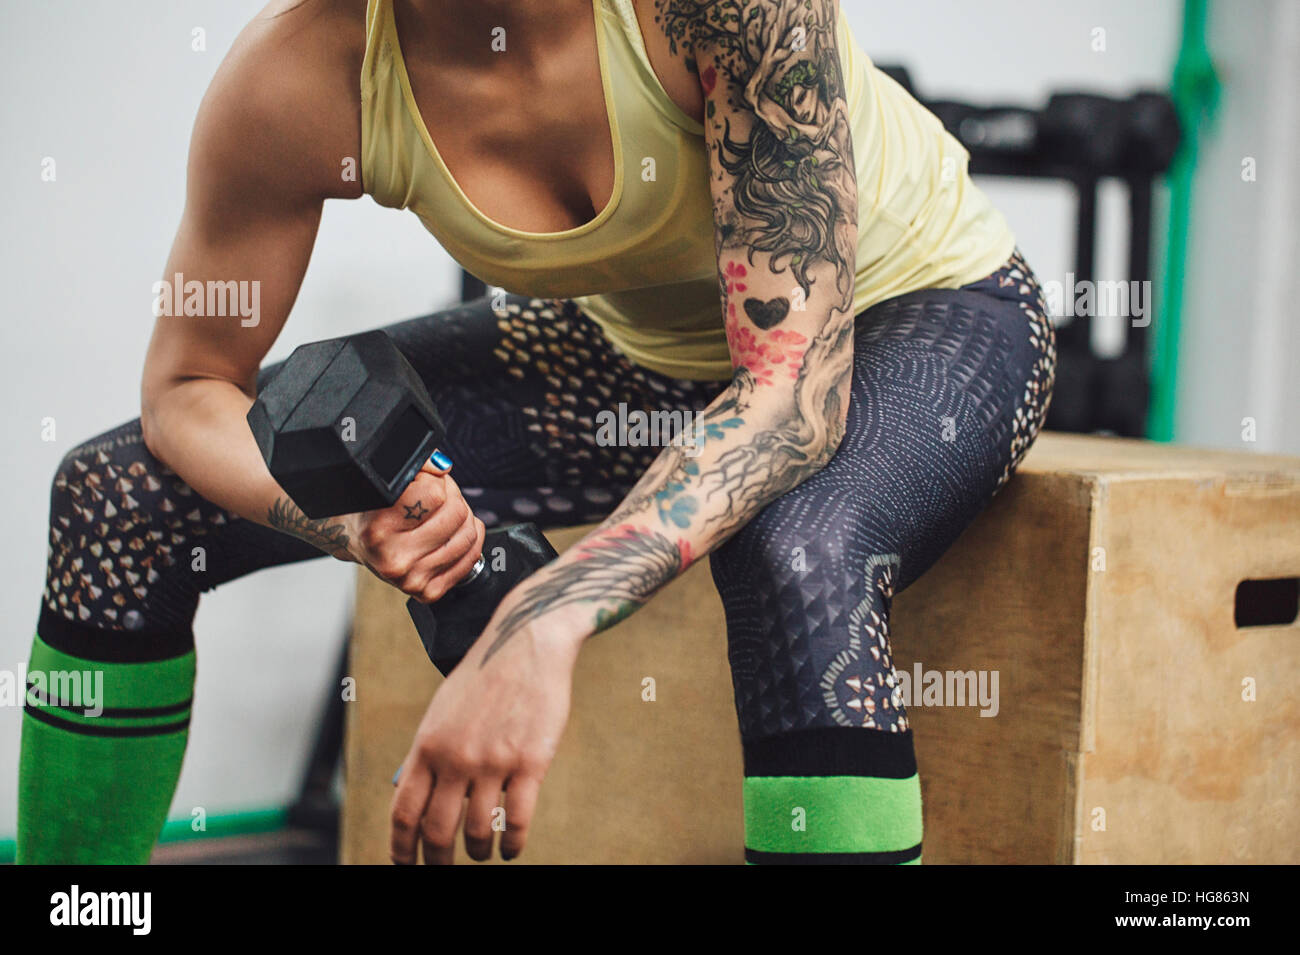 Midsection of athlete lifting dumbbell while sitting on box in gym Stock Photo